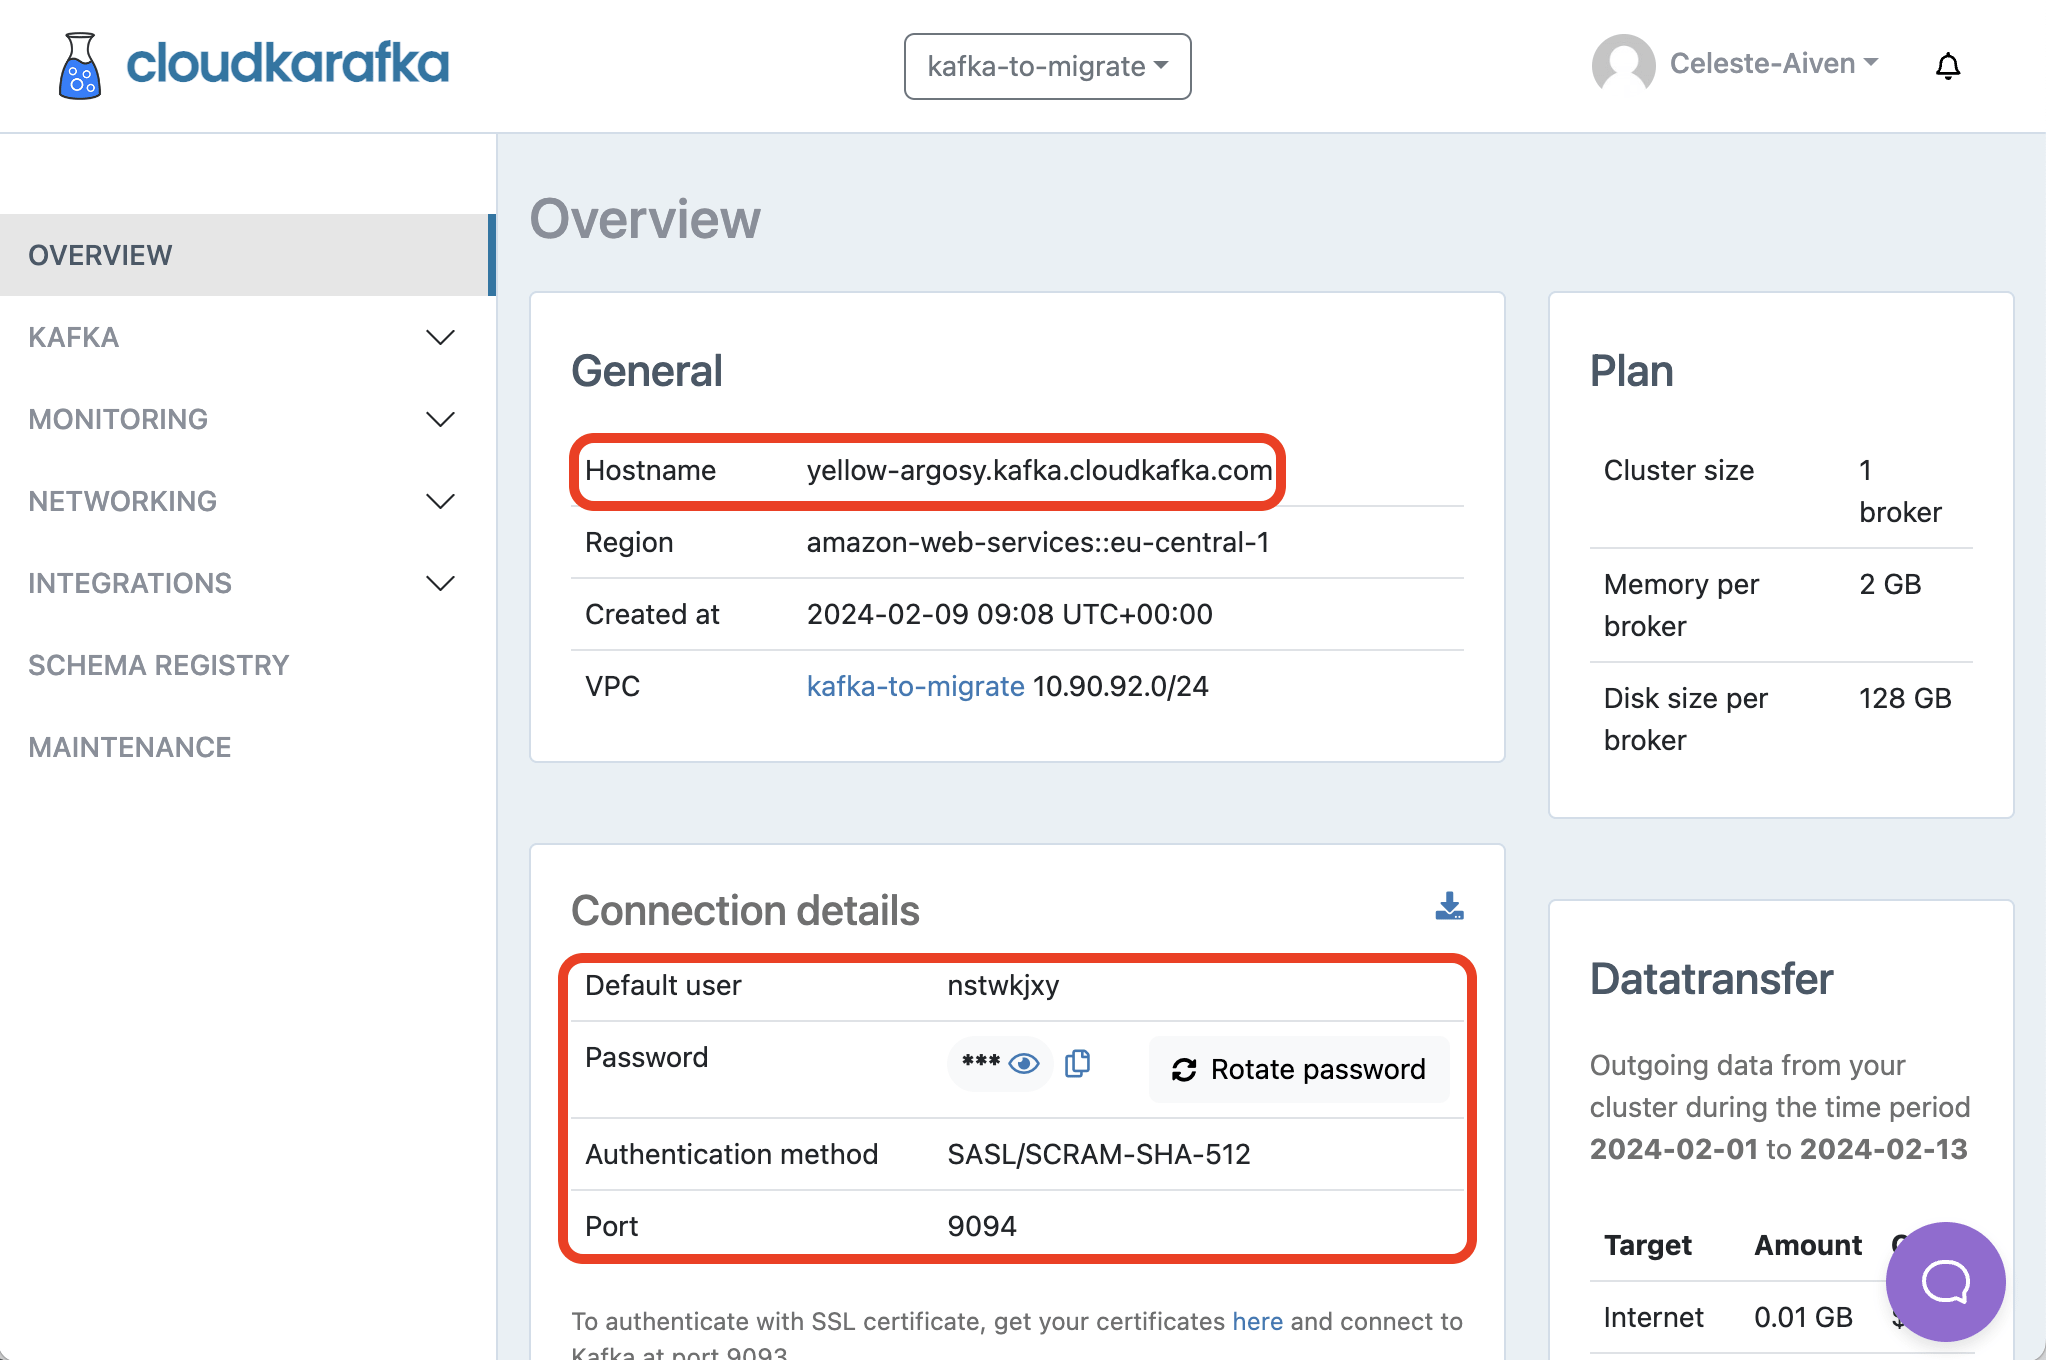 CloudKarafka service overview page with details highlighted.